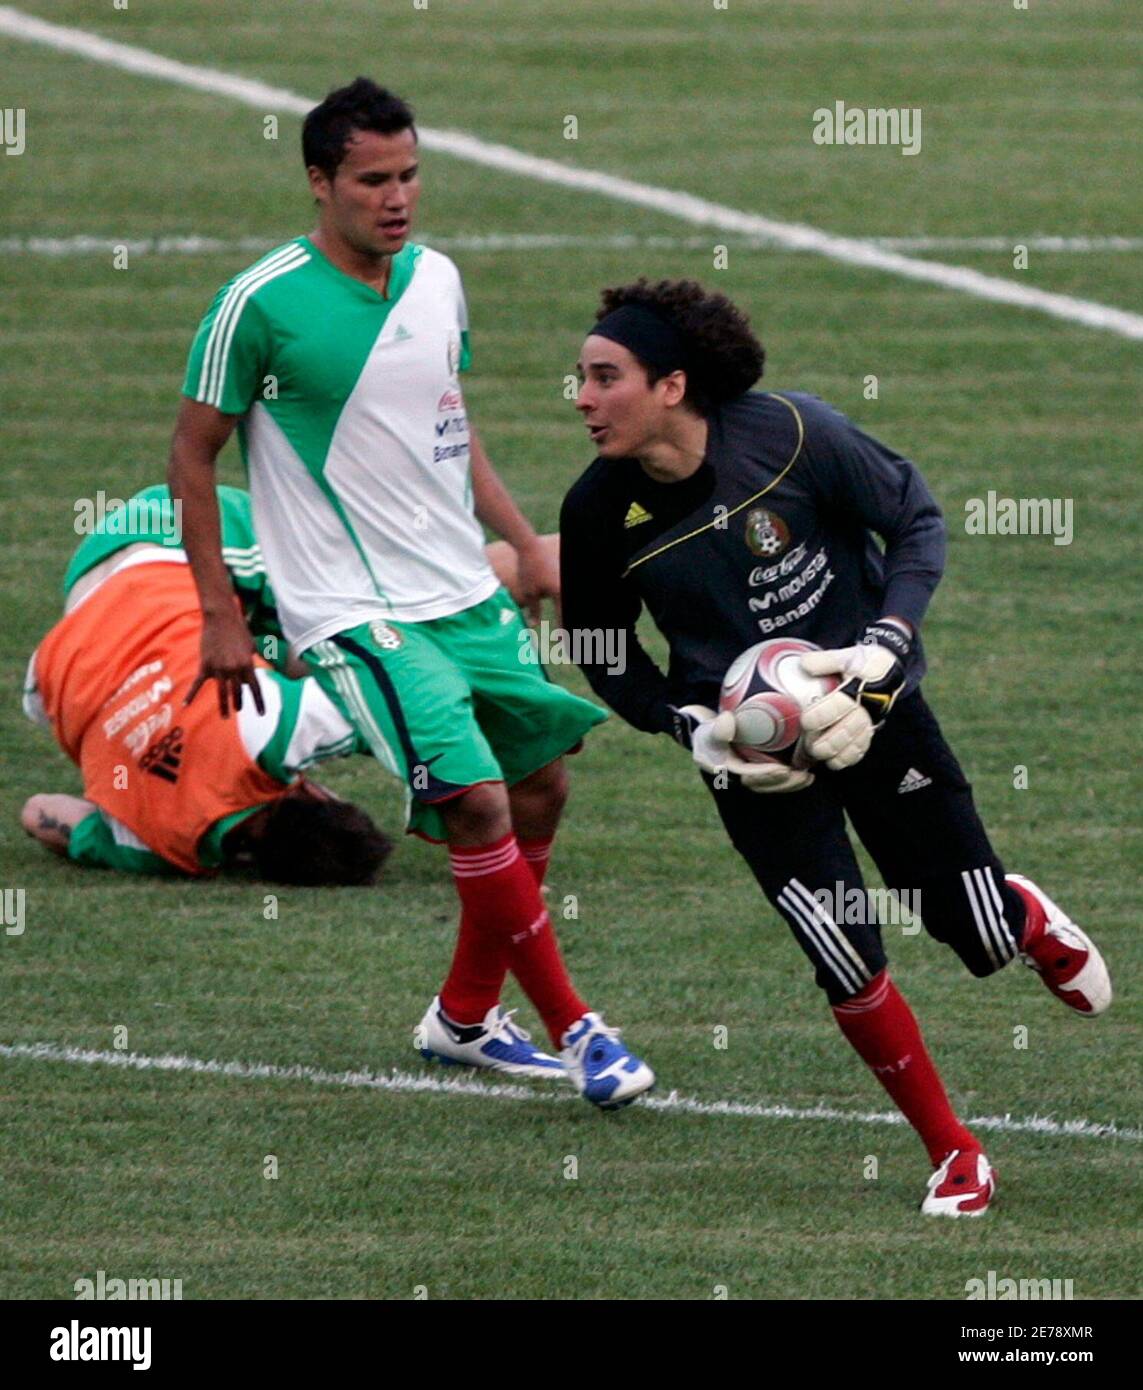 Mexico' s goalkeeper Guillermo Ochoa makes a save during a soccer practice session in San Pedro Sula March 31, 2009. Mexico will play against Honduras in their CONCACAF qualifier for World Cup 2010 on Wednesday. REUTERS/Edgard Garrido (HONDURAS SPORT SOCCER) Stock Photo